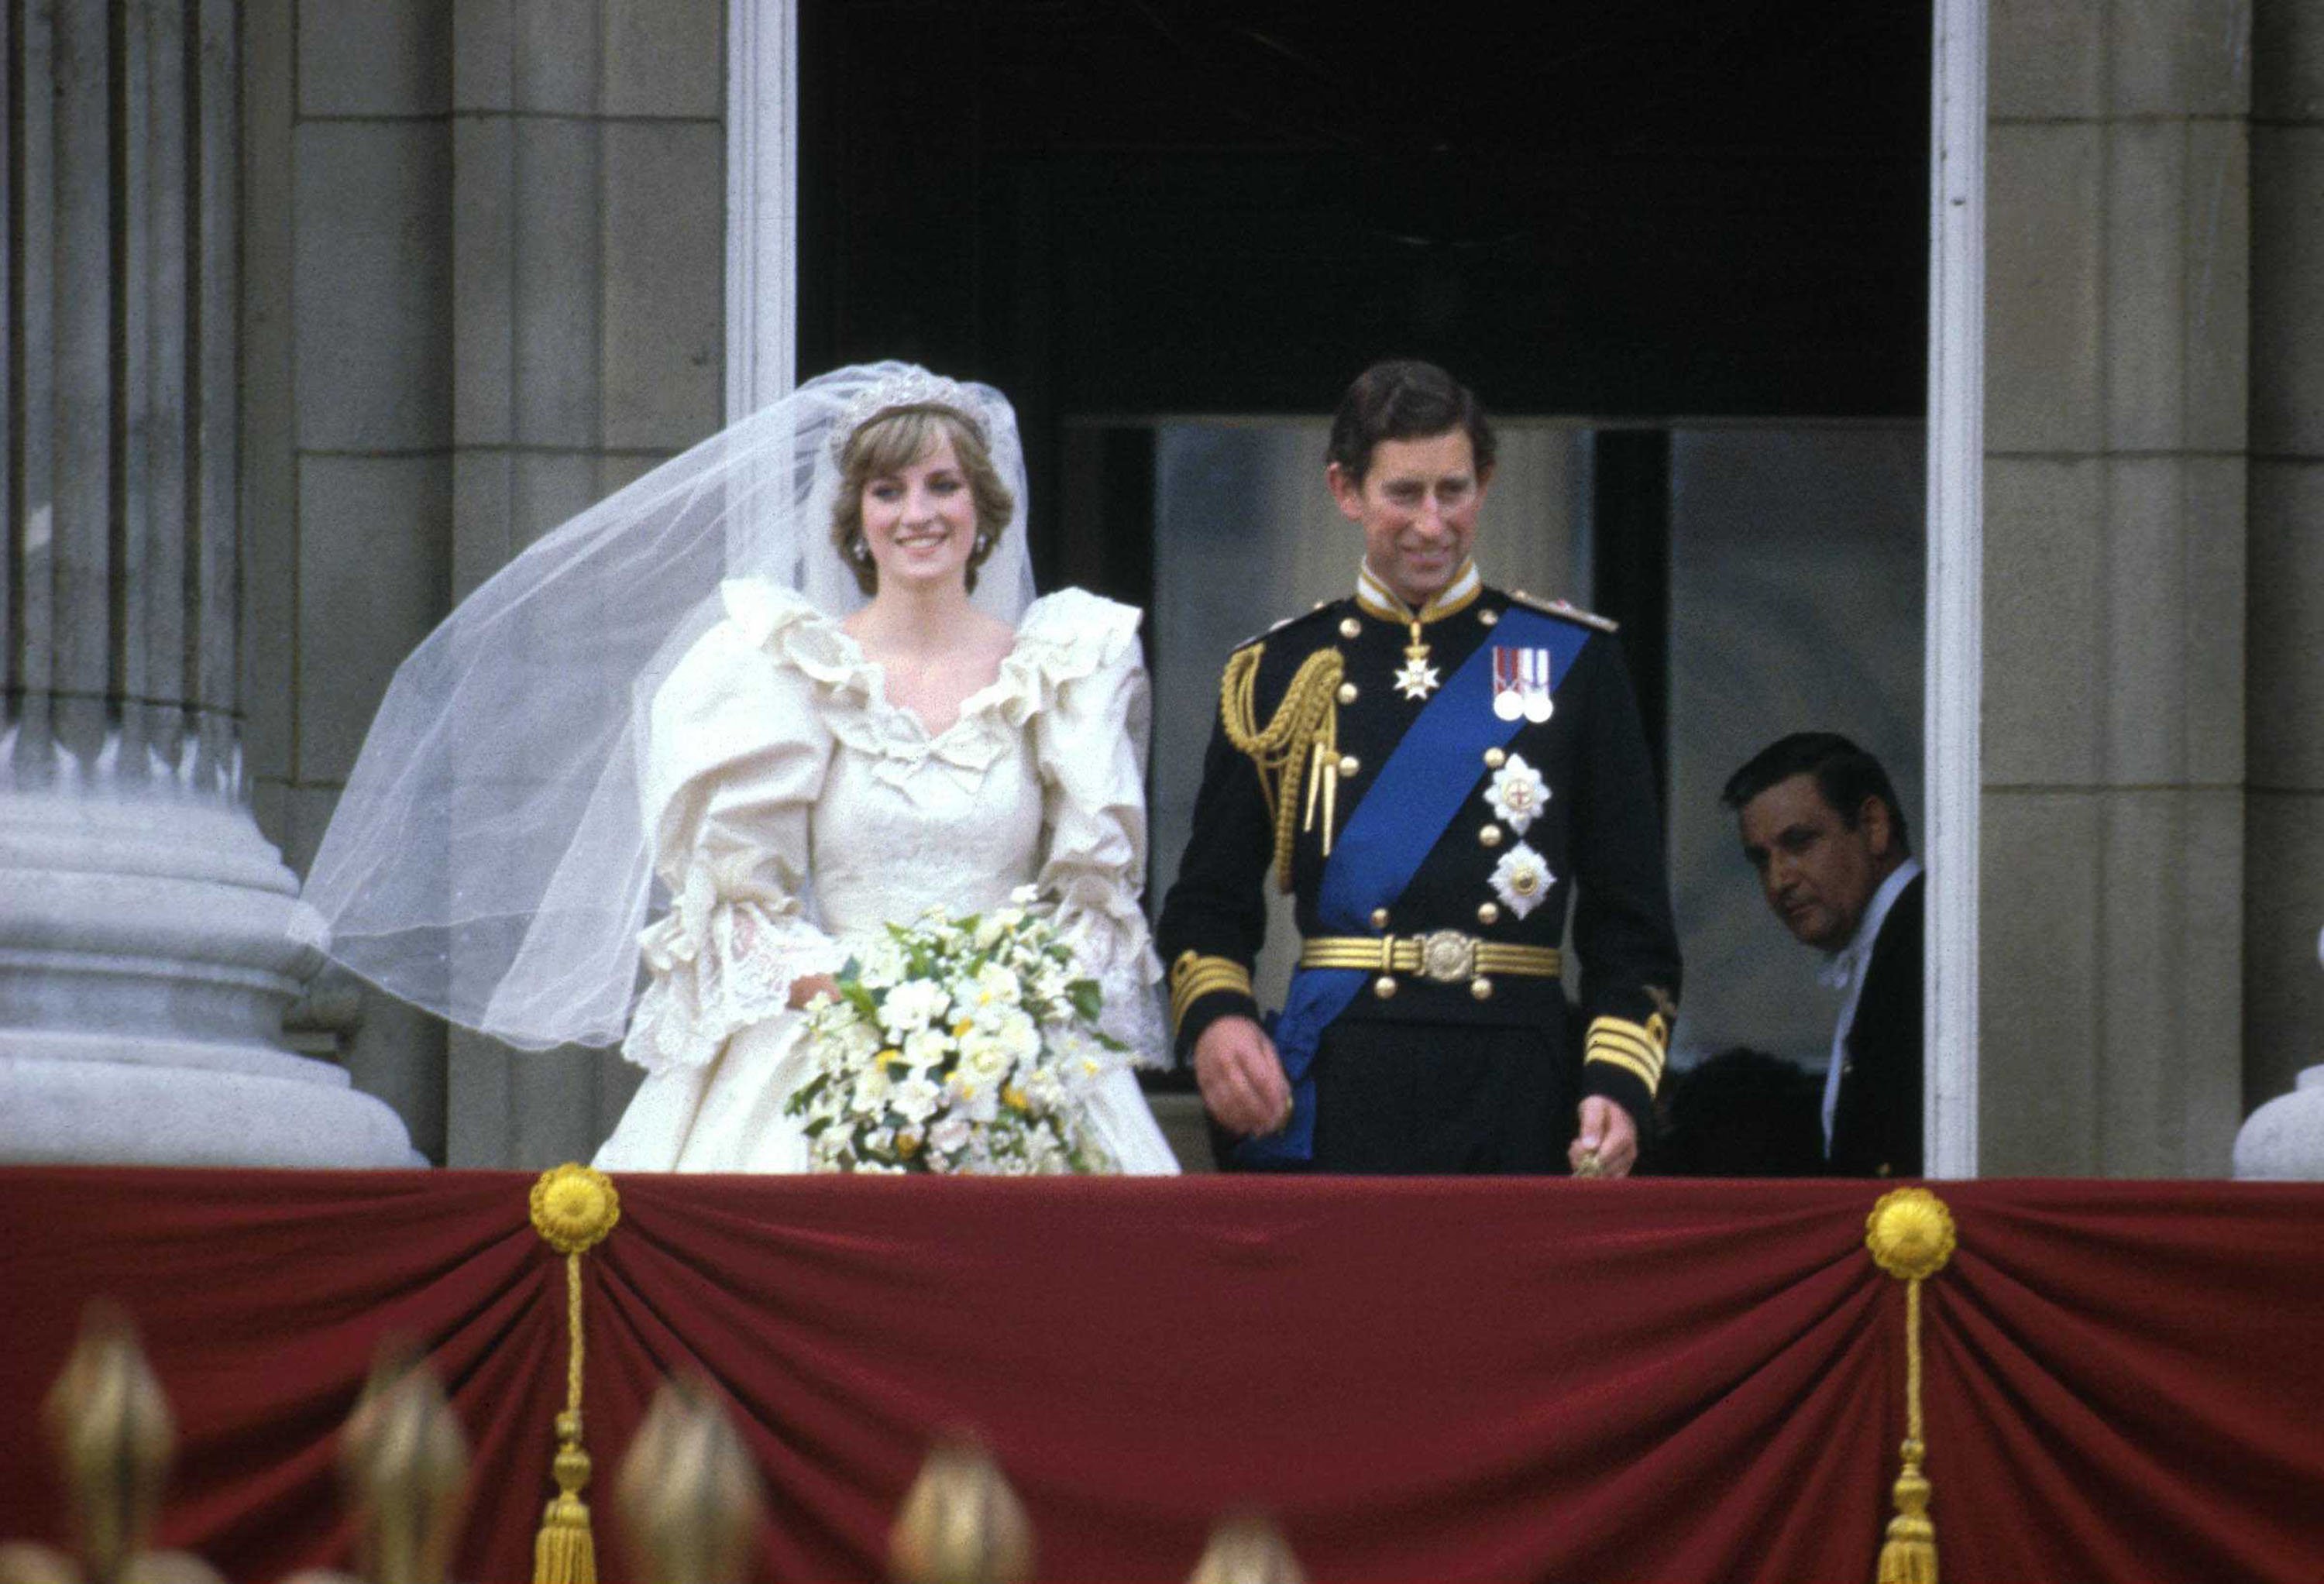 Prince Charles and Princess Diana at St. Paul's Cathedral on July 29, 1981, London, England | Photo: Getty Images